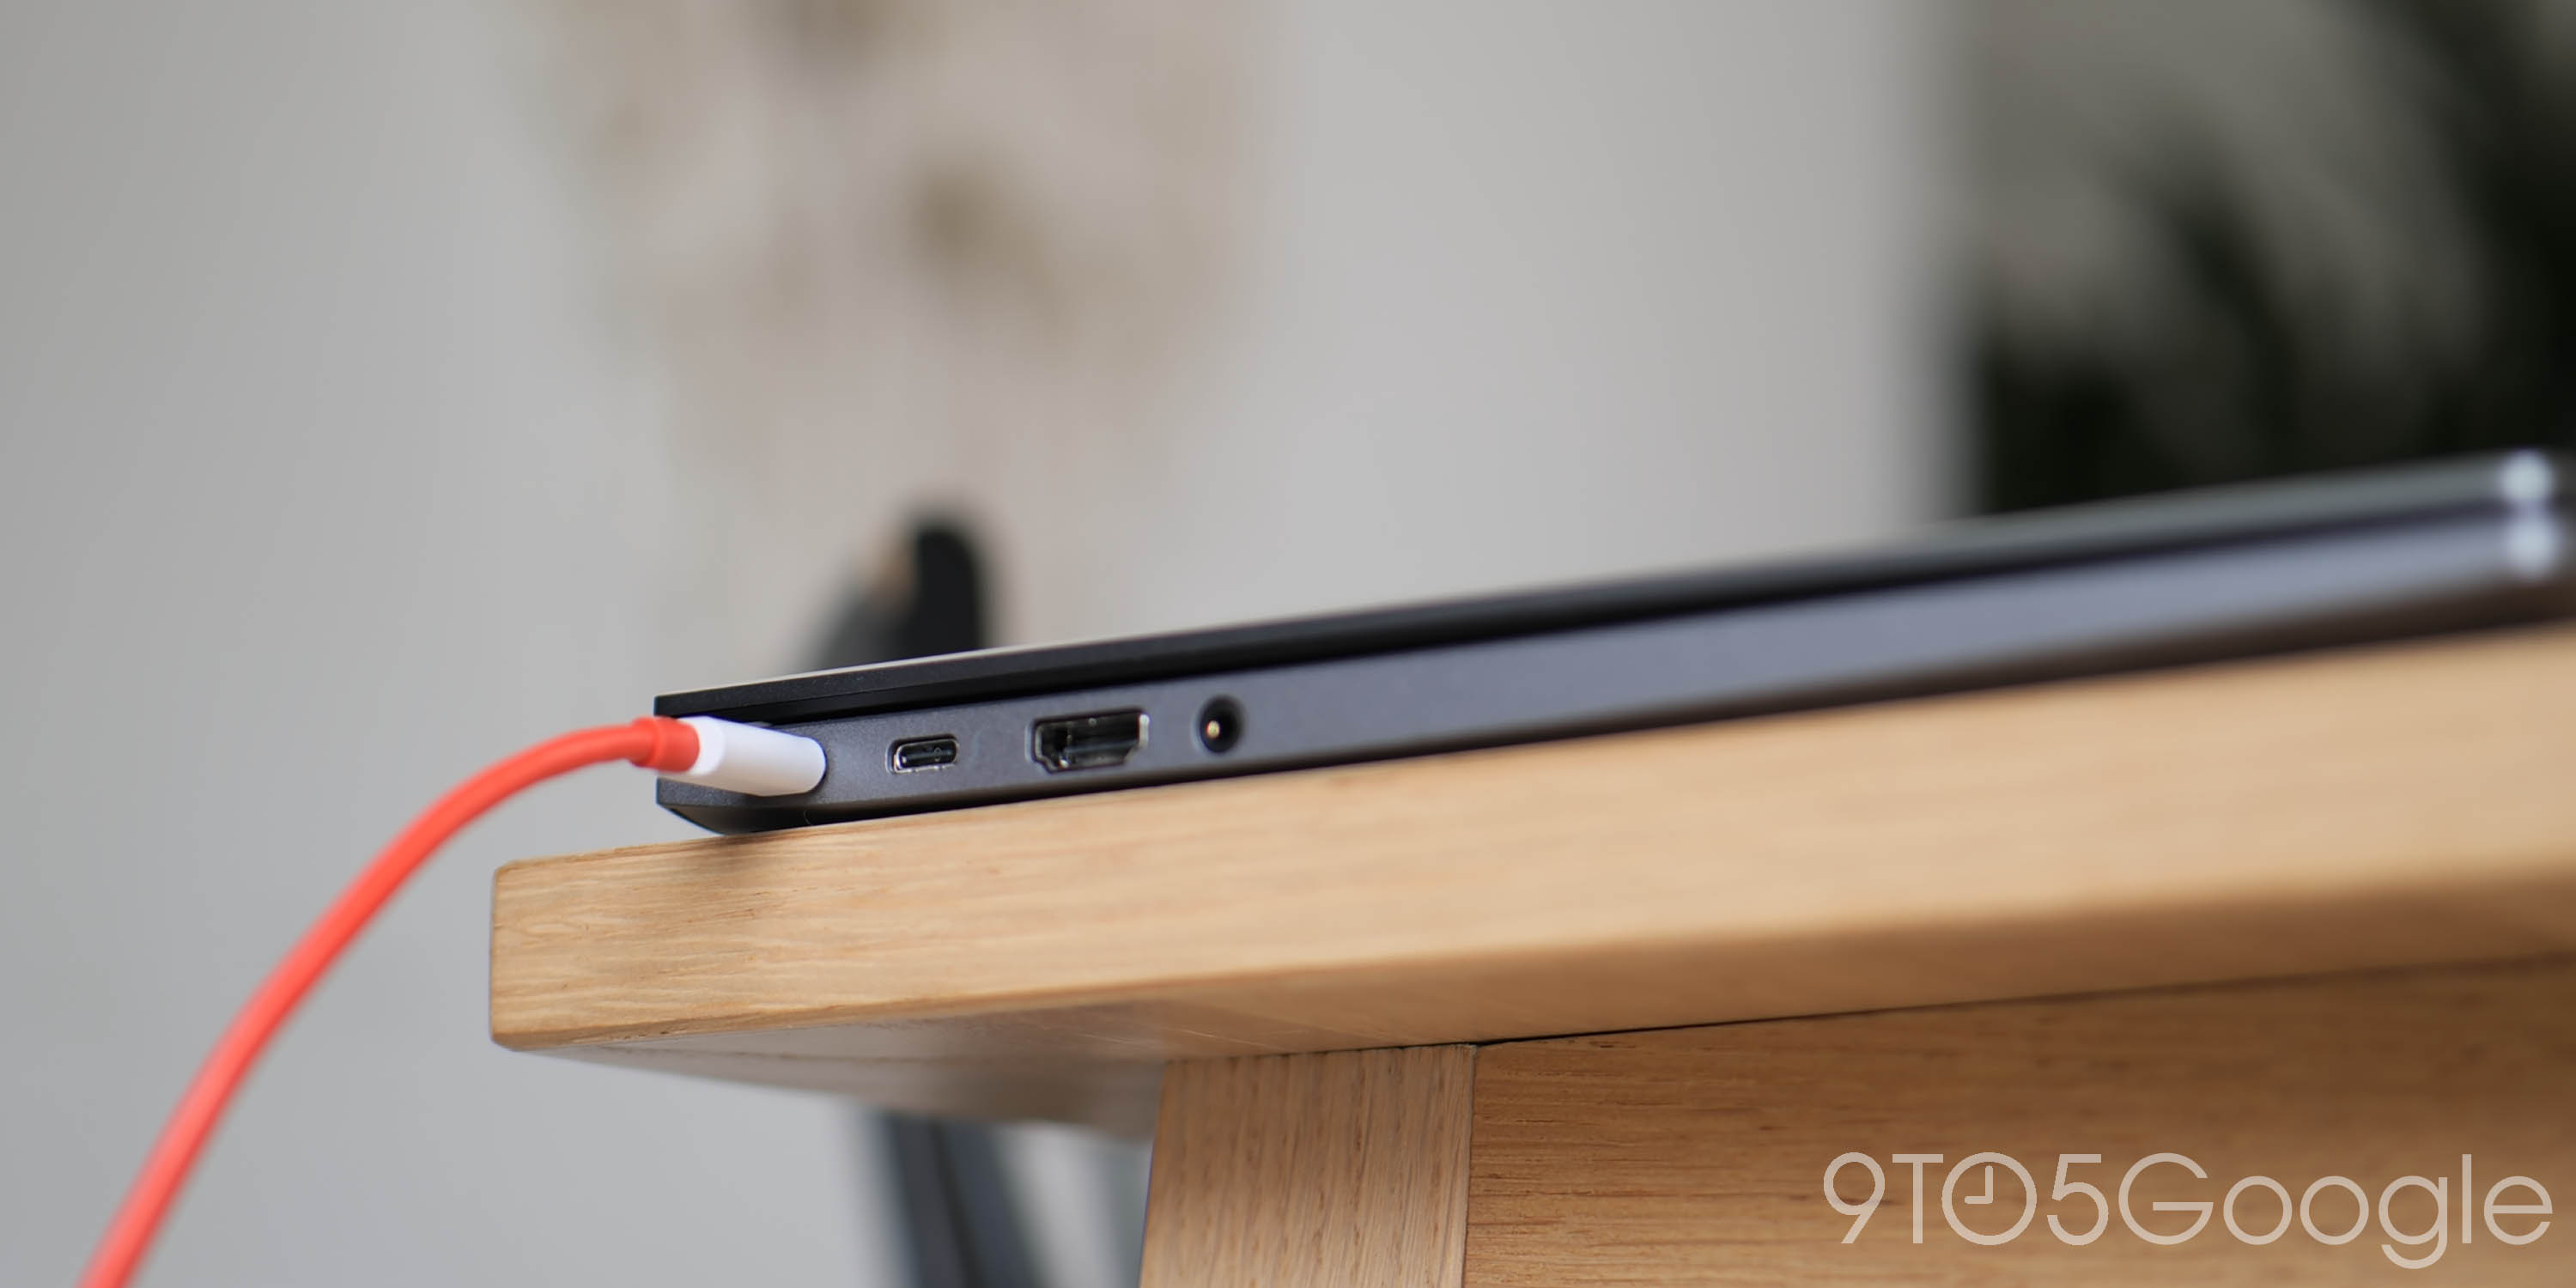 Adaptive Charging will extend your Chromebook’s longterm battery life – coming soon to Chrome OS